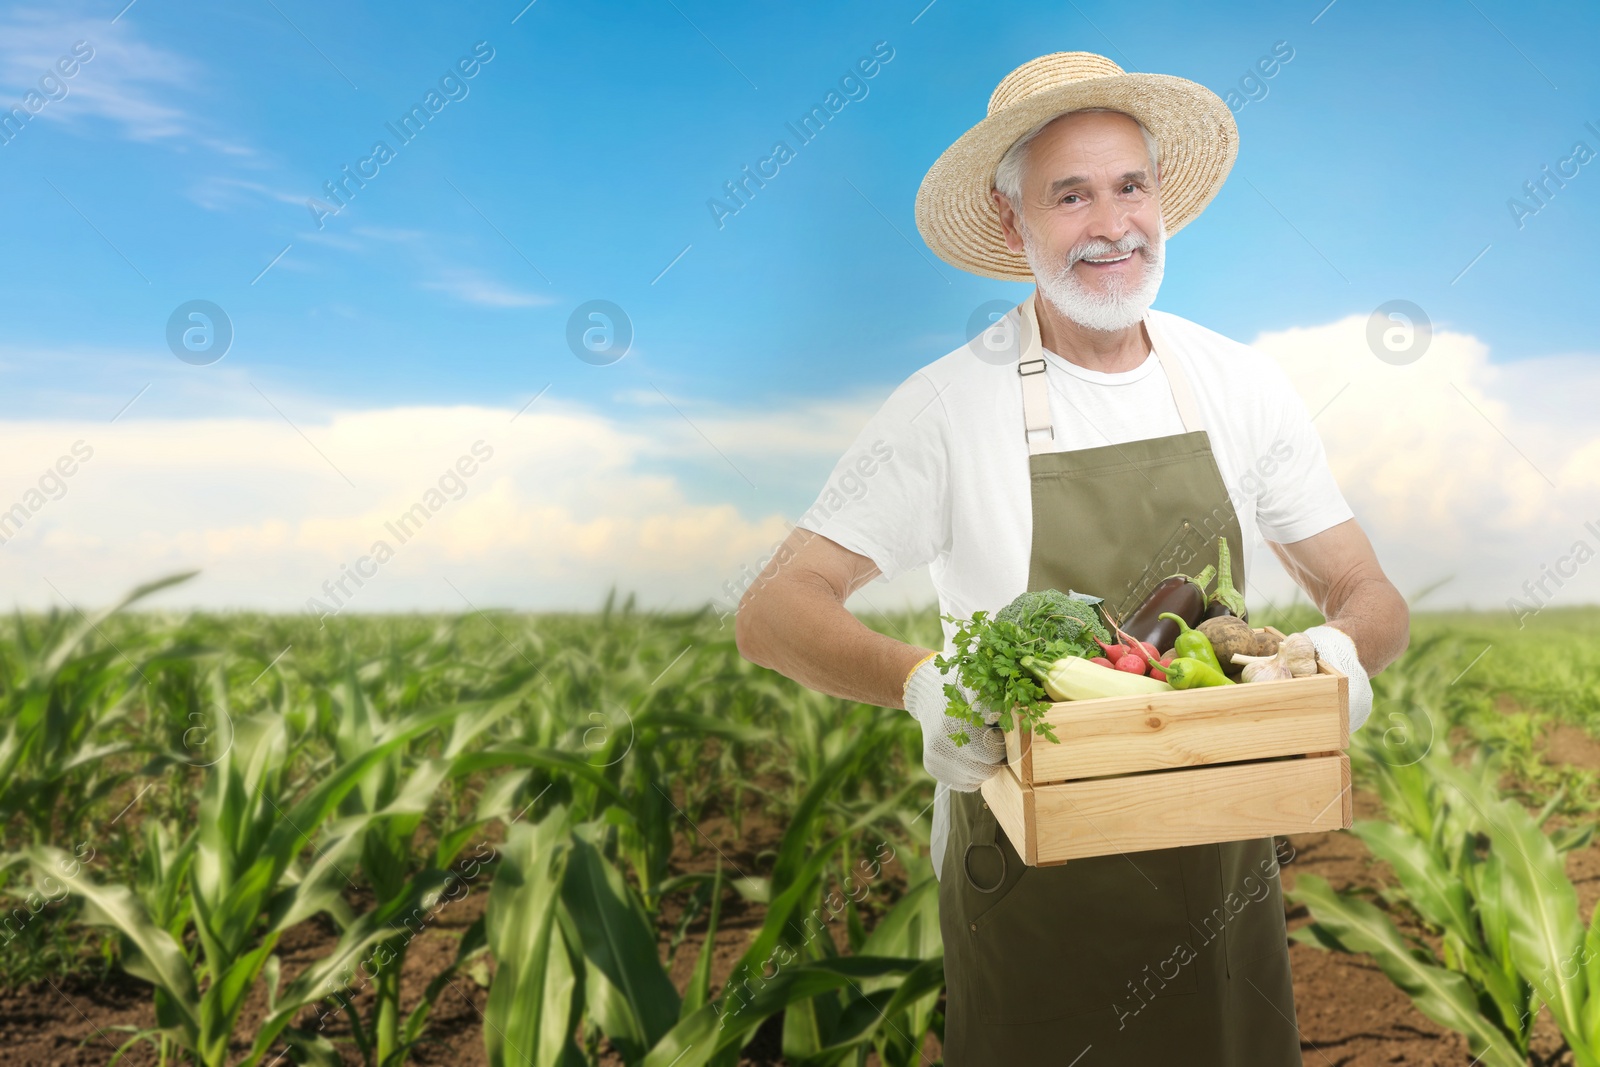 Image of Harvesting season. Farmer holding wooden crate with crop in field